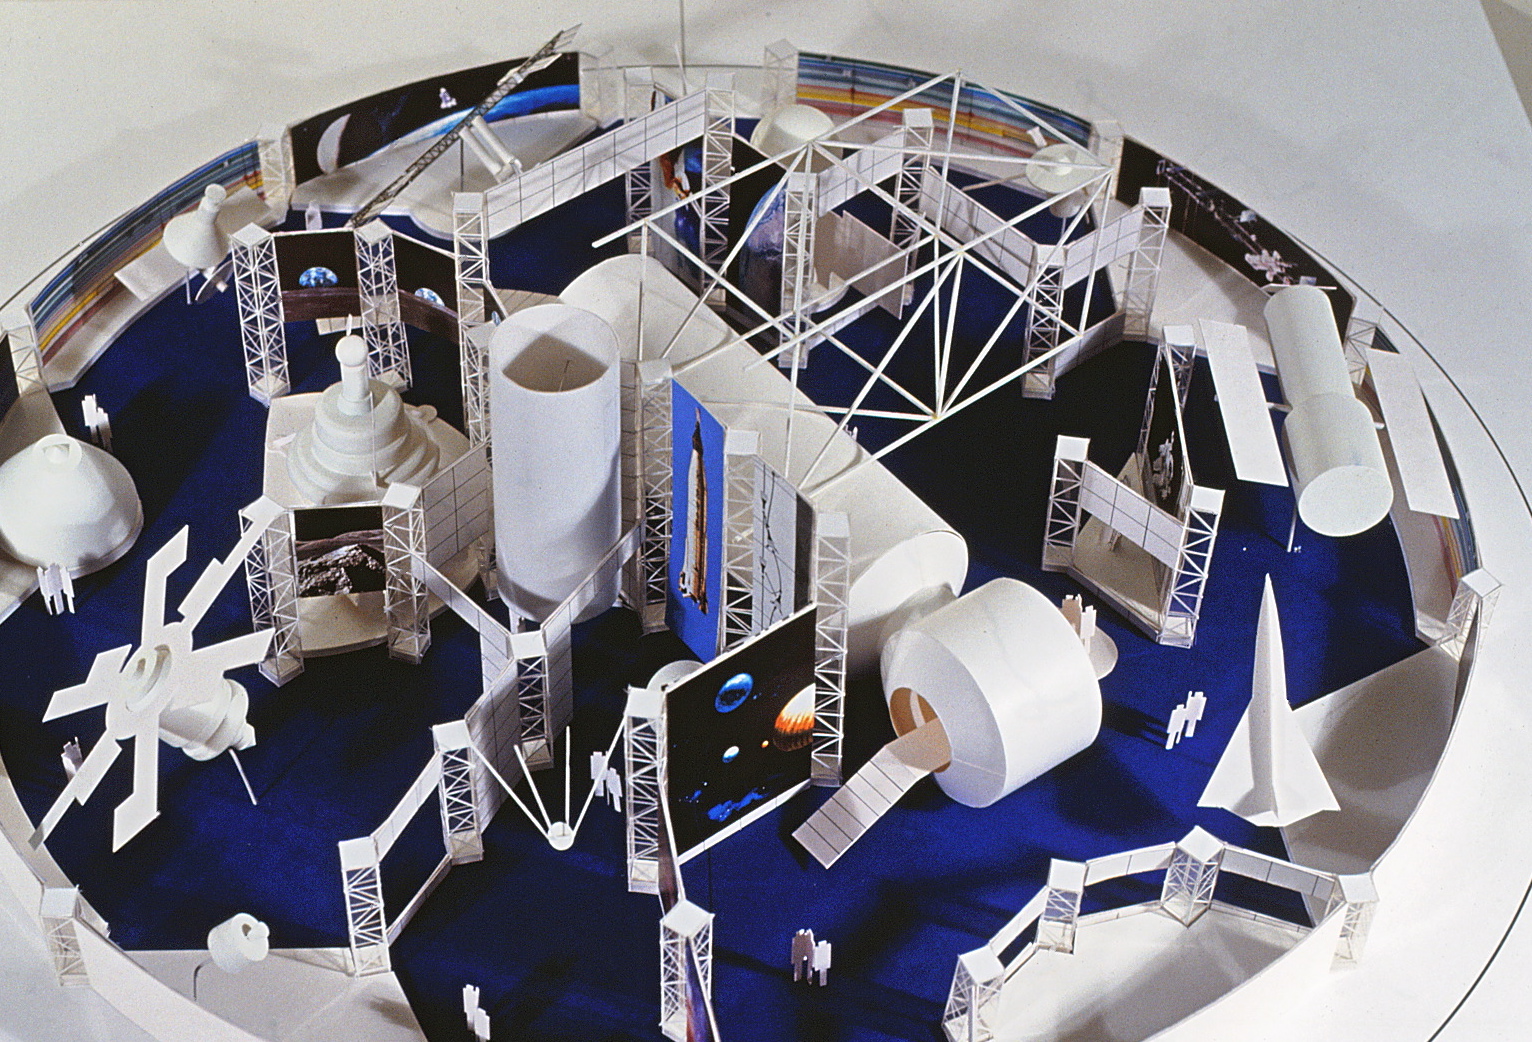 Photo of the exhibit model with no dome over it, taken from above, featuring the entrance side of the complex.